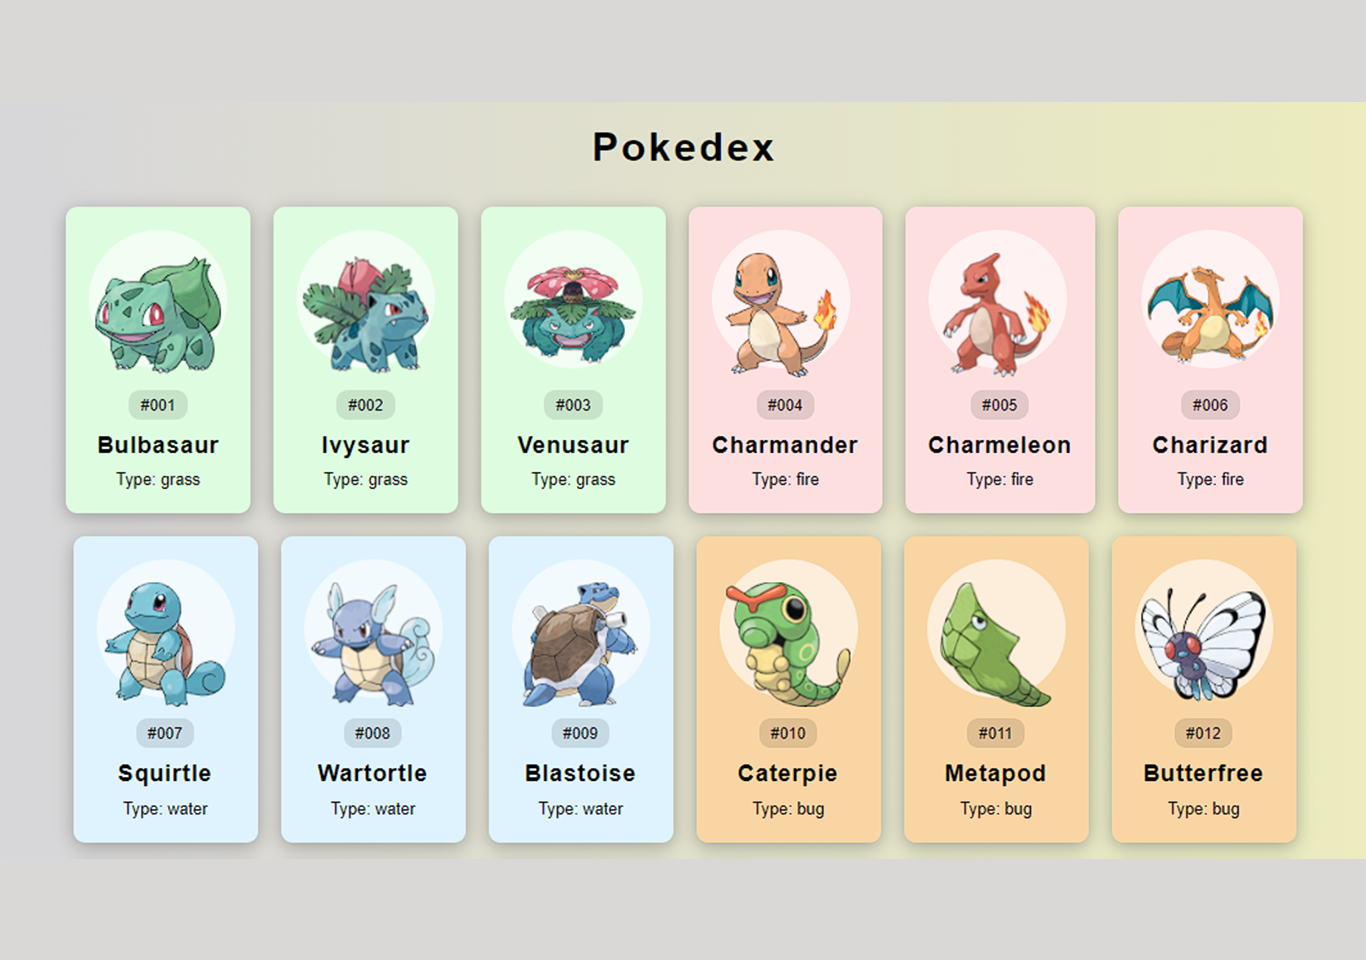 Pokedox project in JavaScript with source code